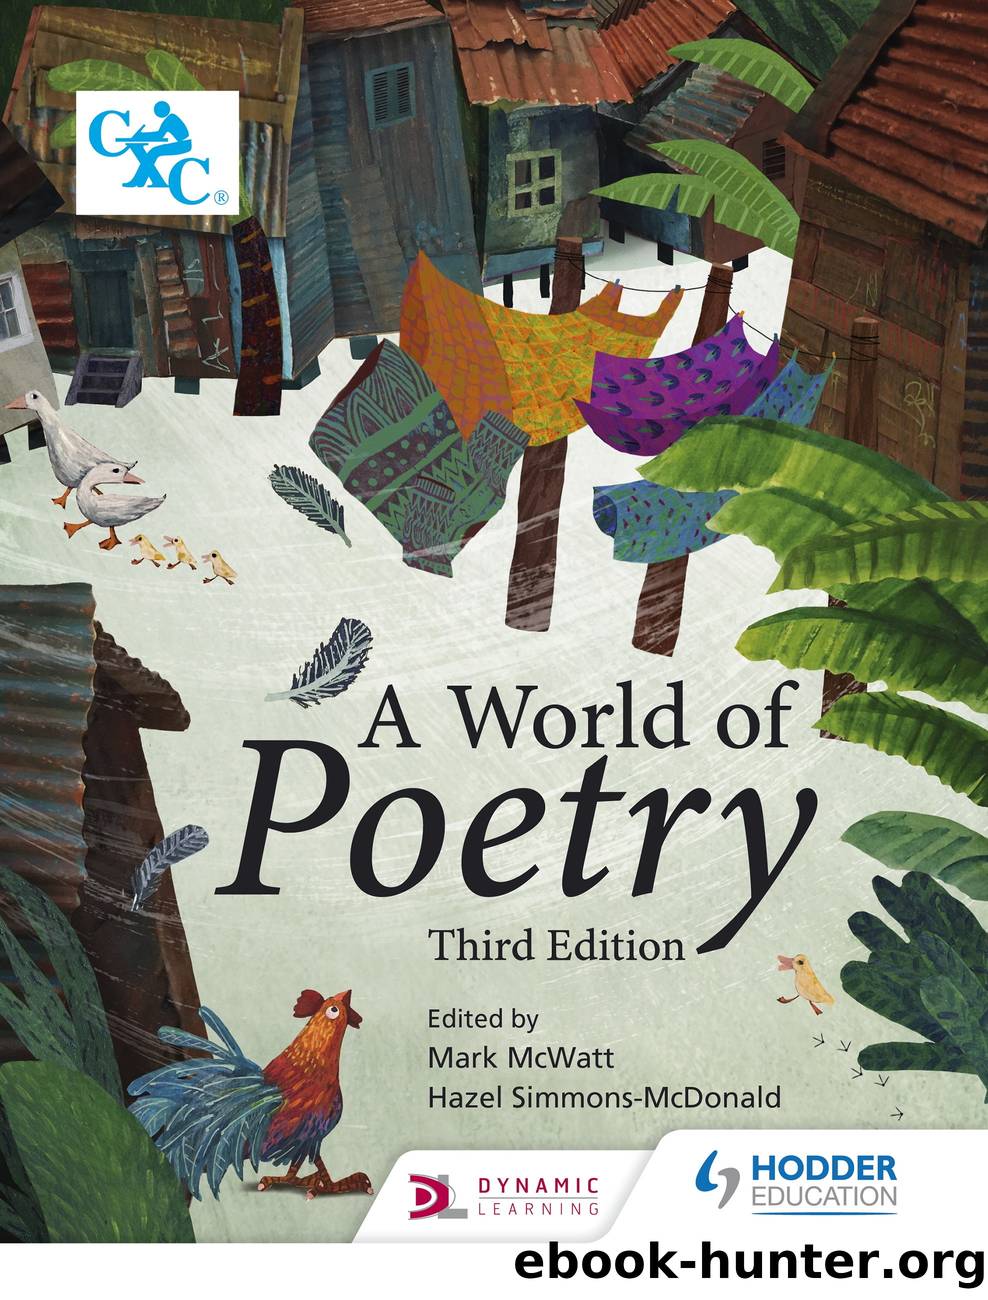 A World of Poetry by Author